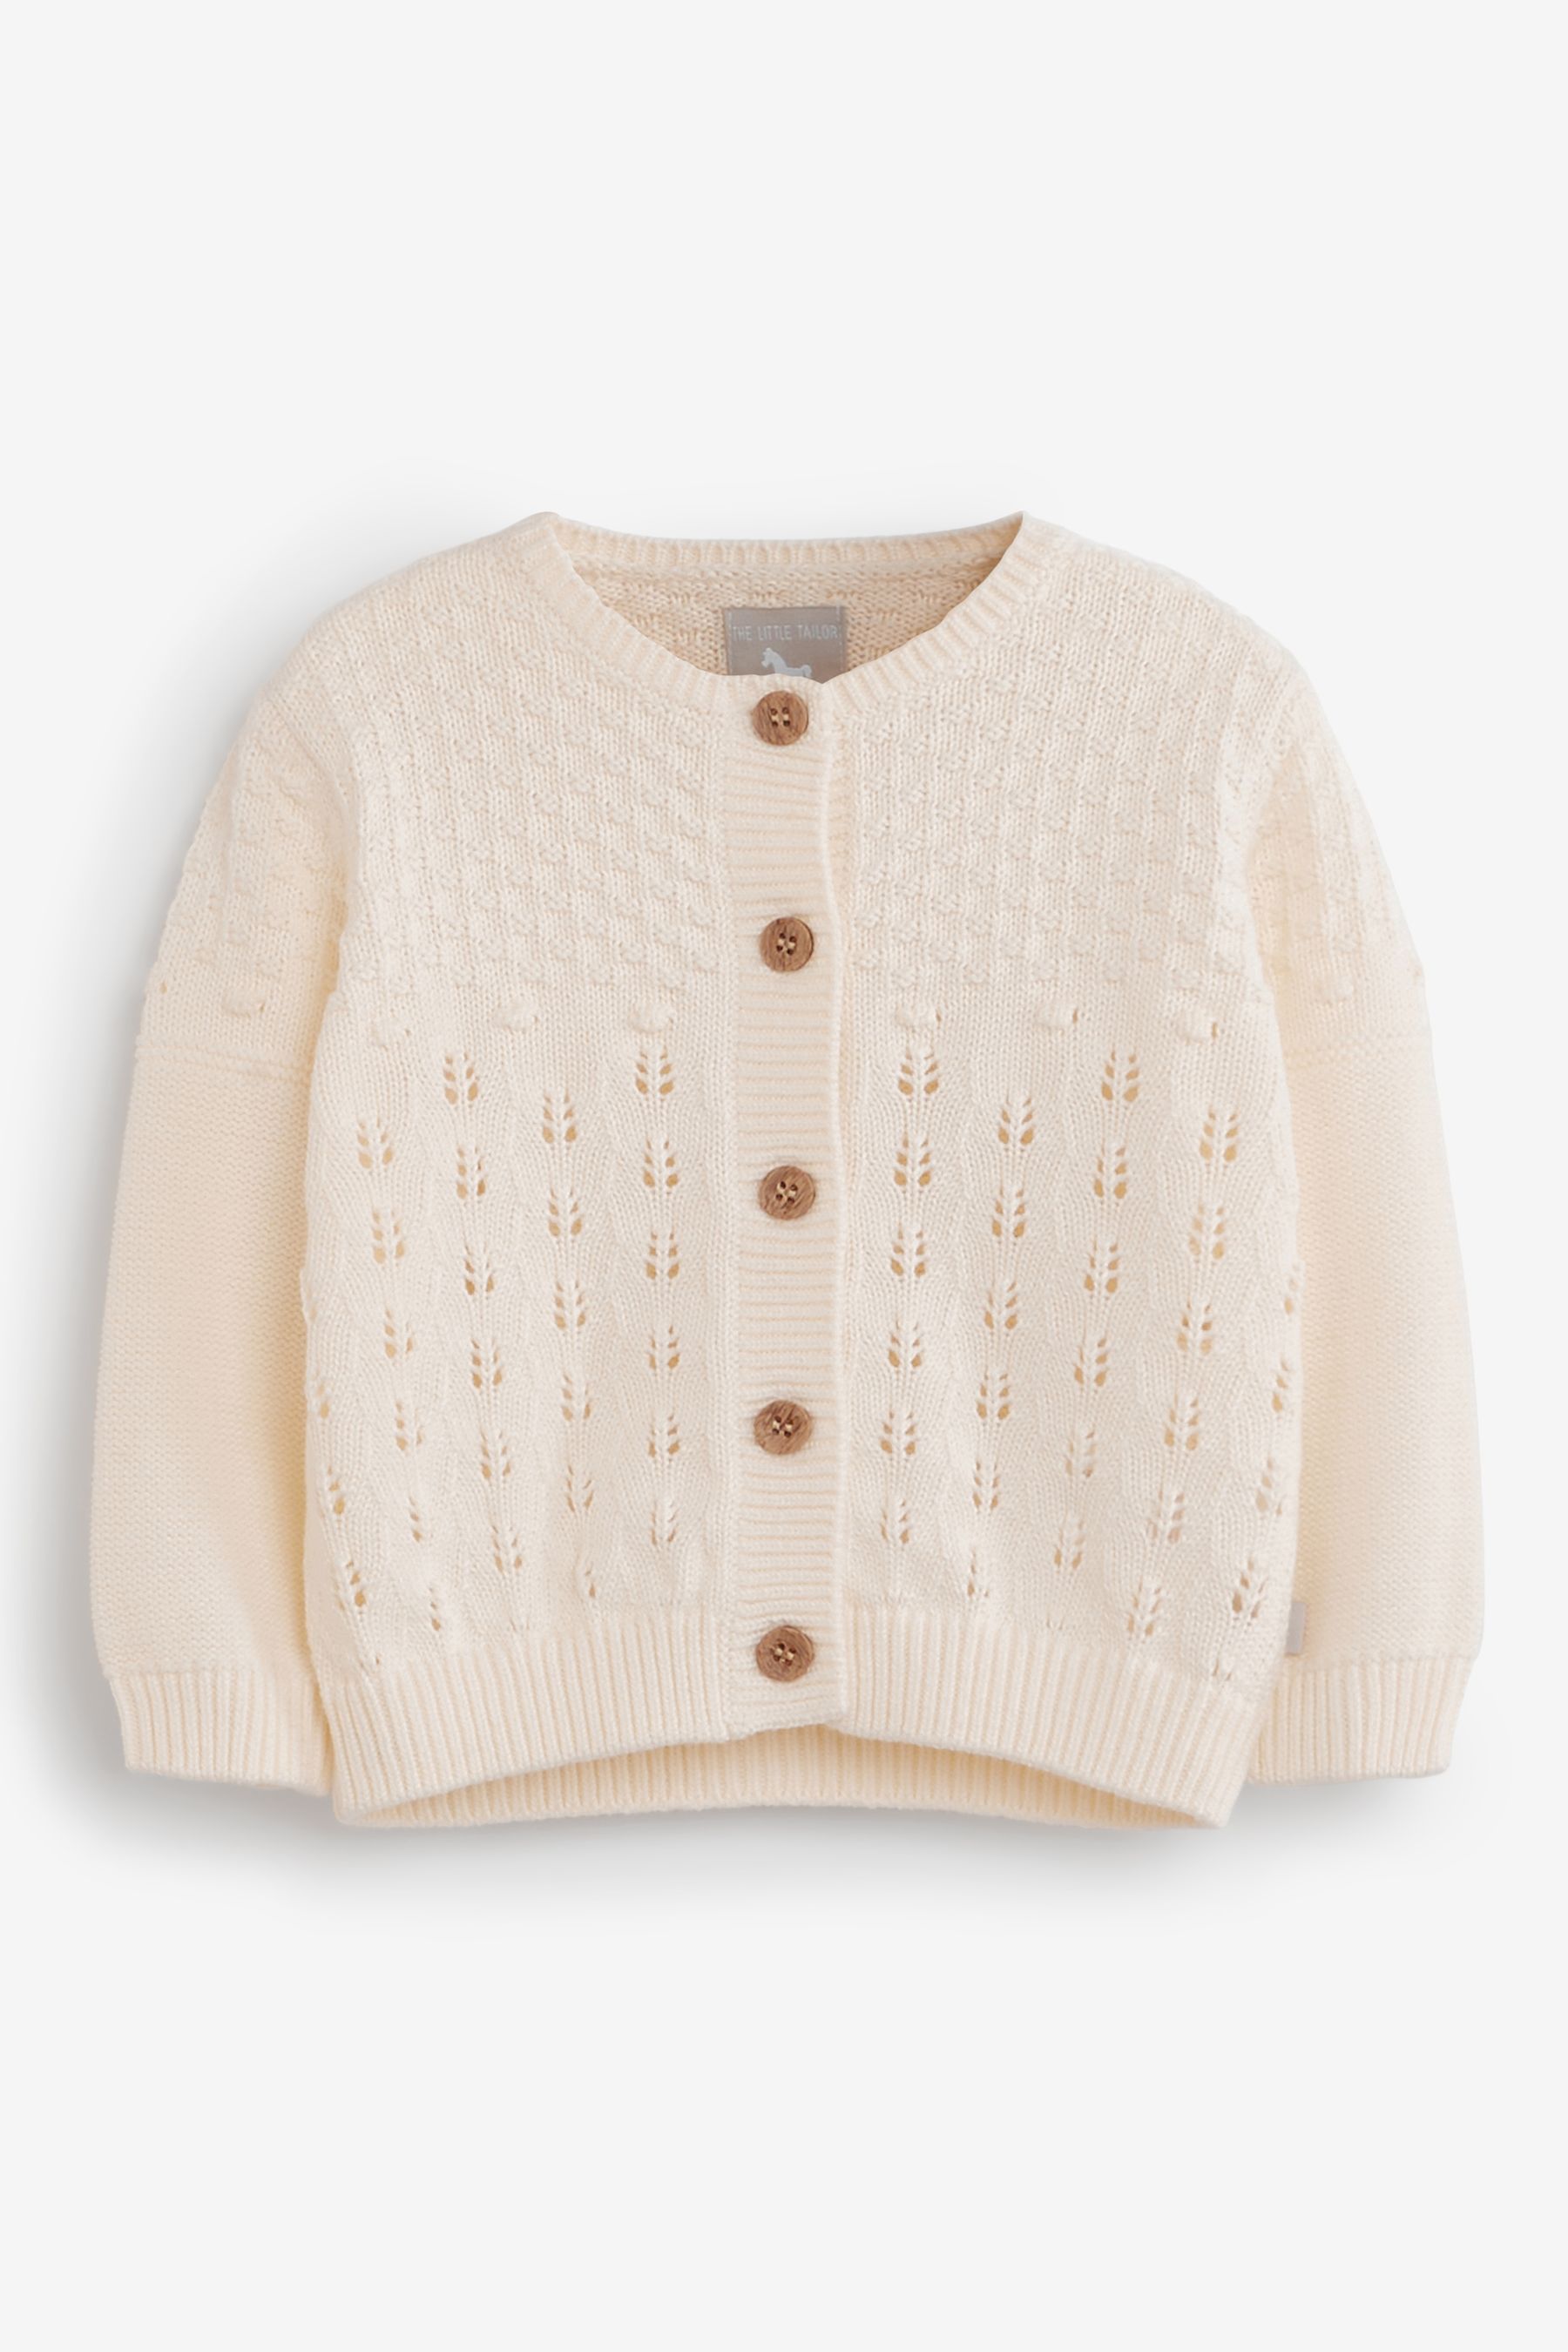 Buy The Little Tailor Pointelle Baby Cardigan from the Next UK online shop